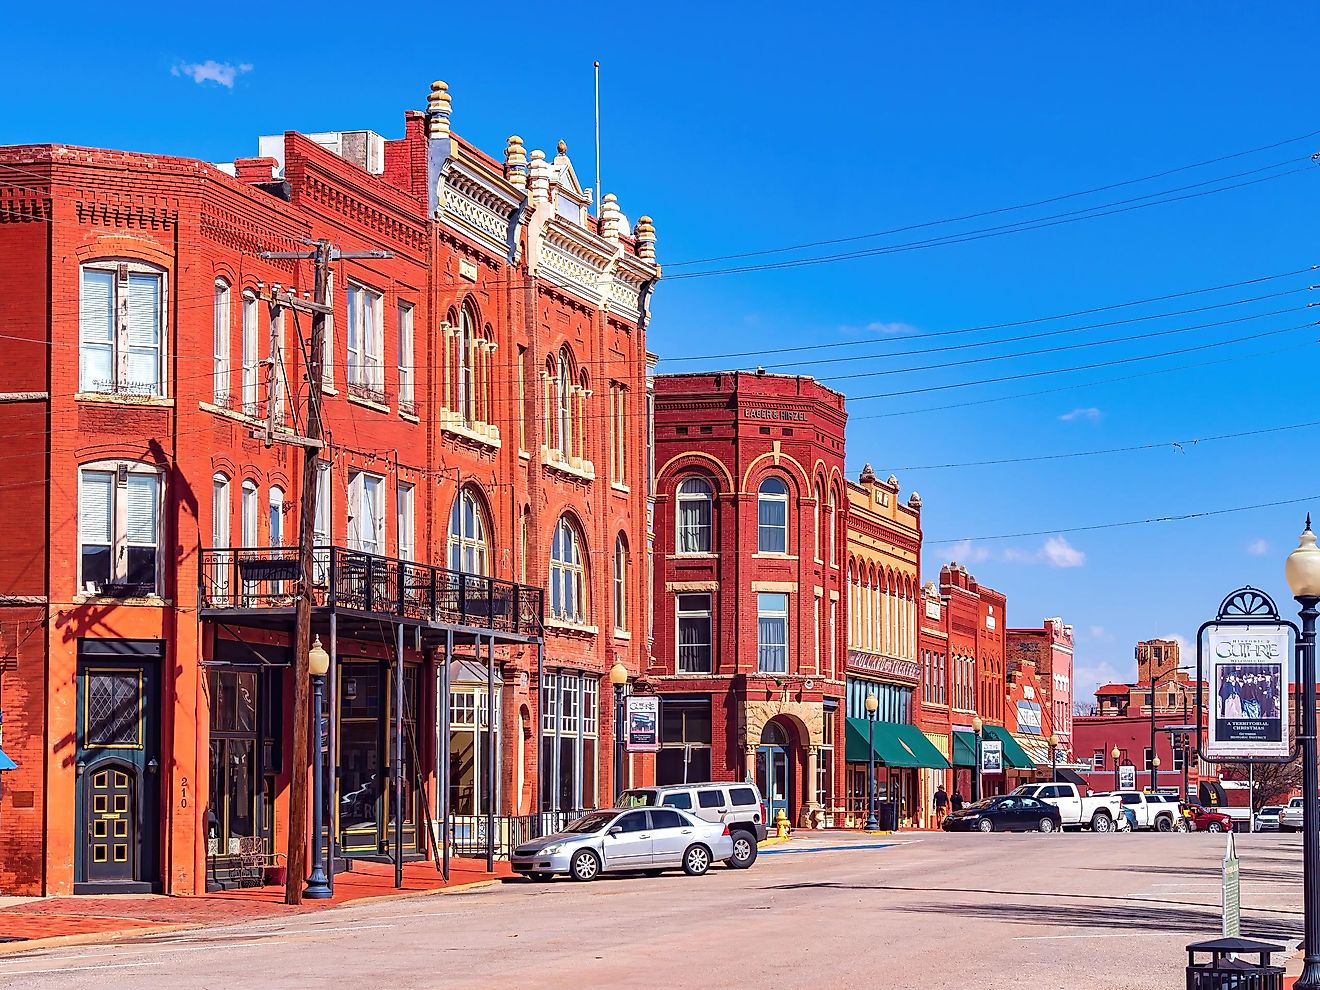 Downtown Guthrie, Oklahoma. Editorial credit: Kit Leong / Shutterstock.com